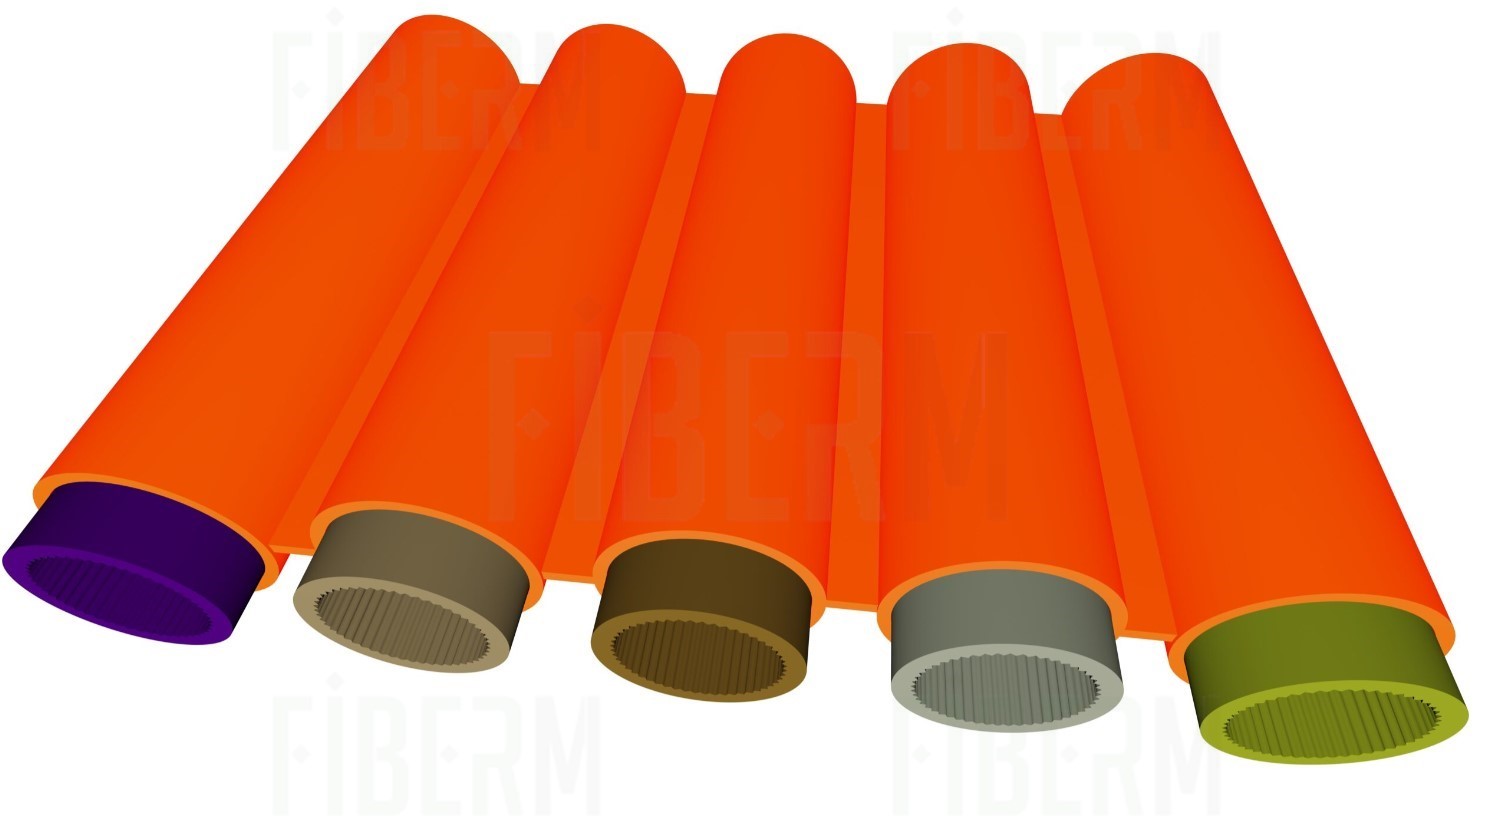 Flat Bundle / Package of Thick-Walled HDPE Microducts 4 x fi 8/4mm for direct burial installation